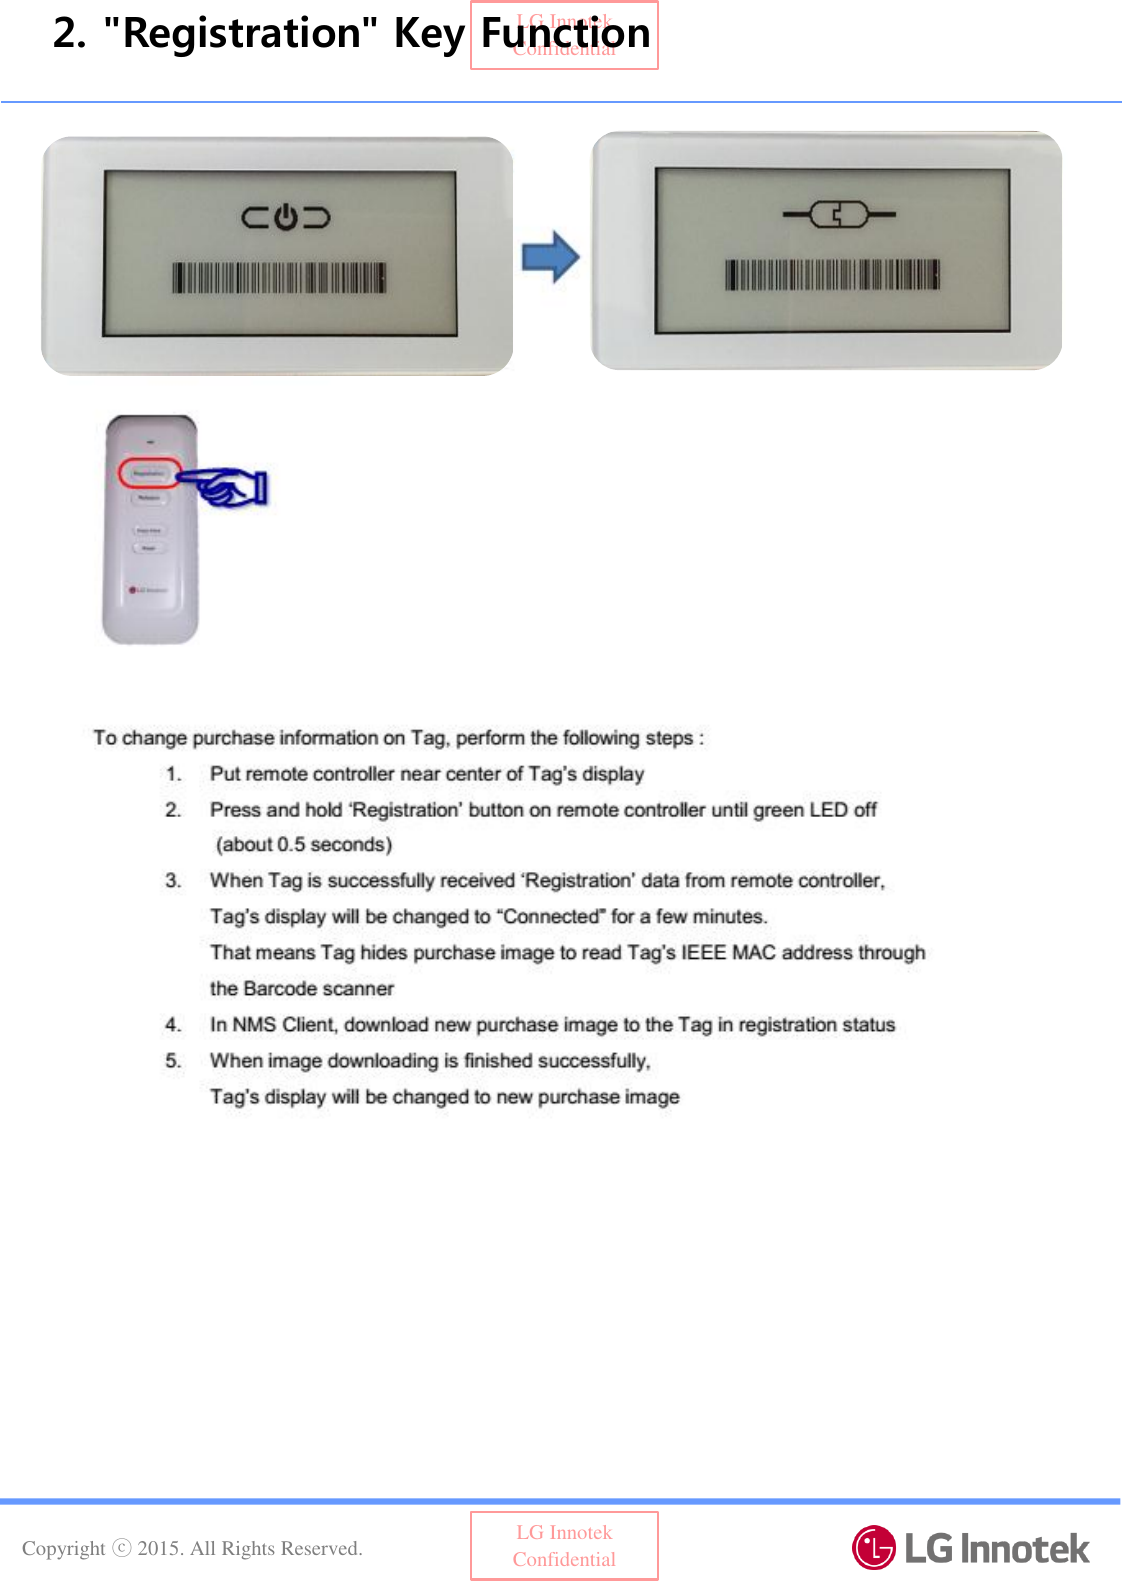 Copyright ⓒ 2015. All Rights Reserved. LG Innotek Confidential LG Innotek Confidential 2. &quot;Registration&quot; Key Function 